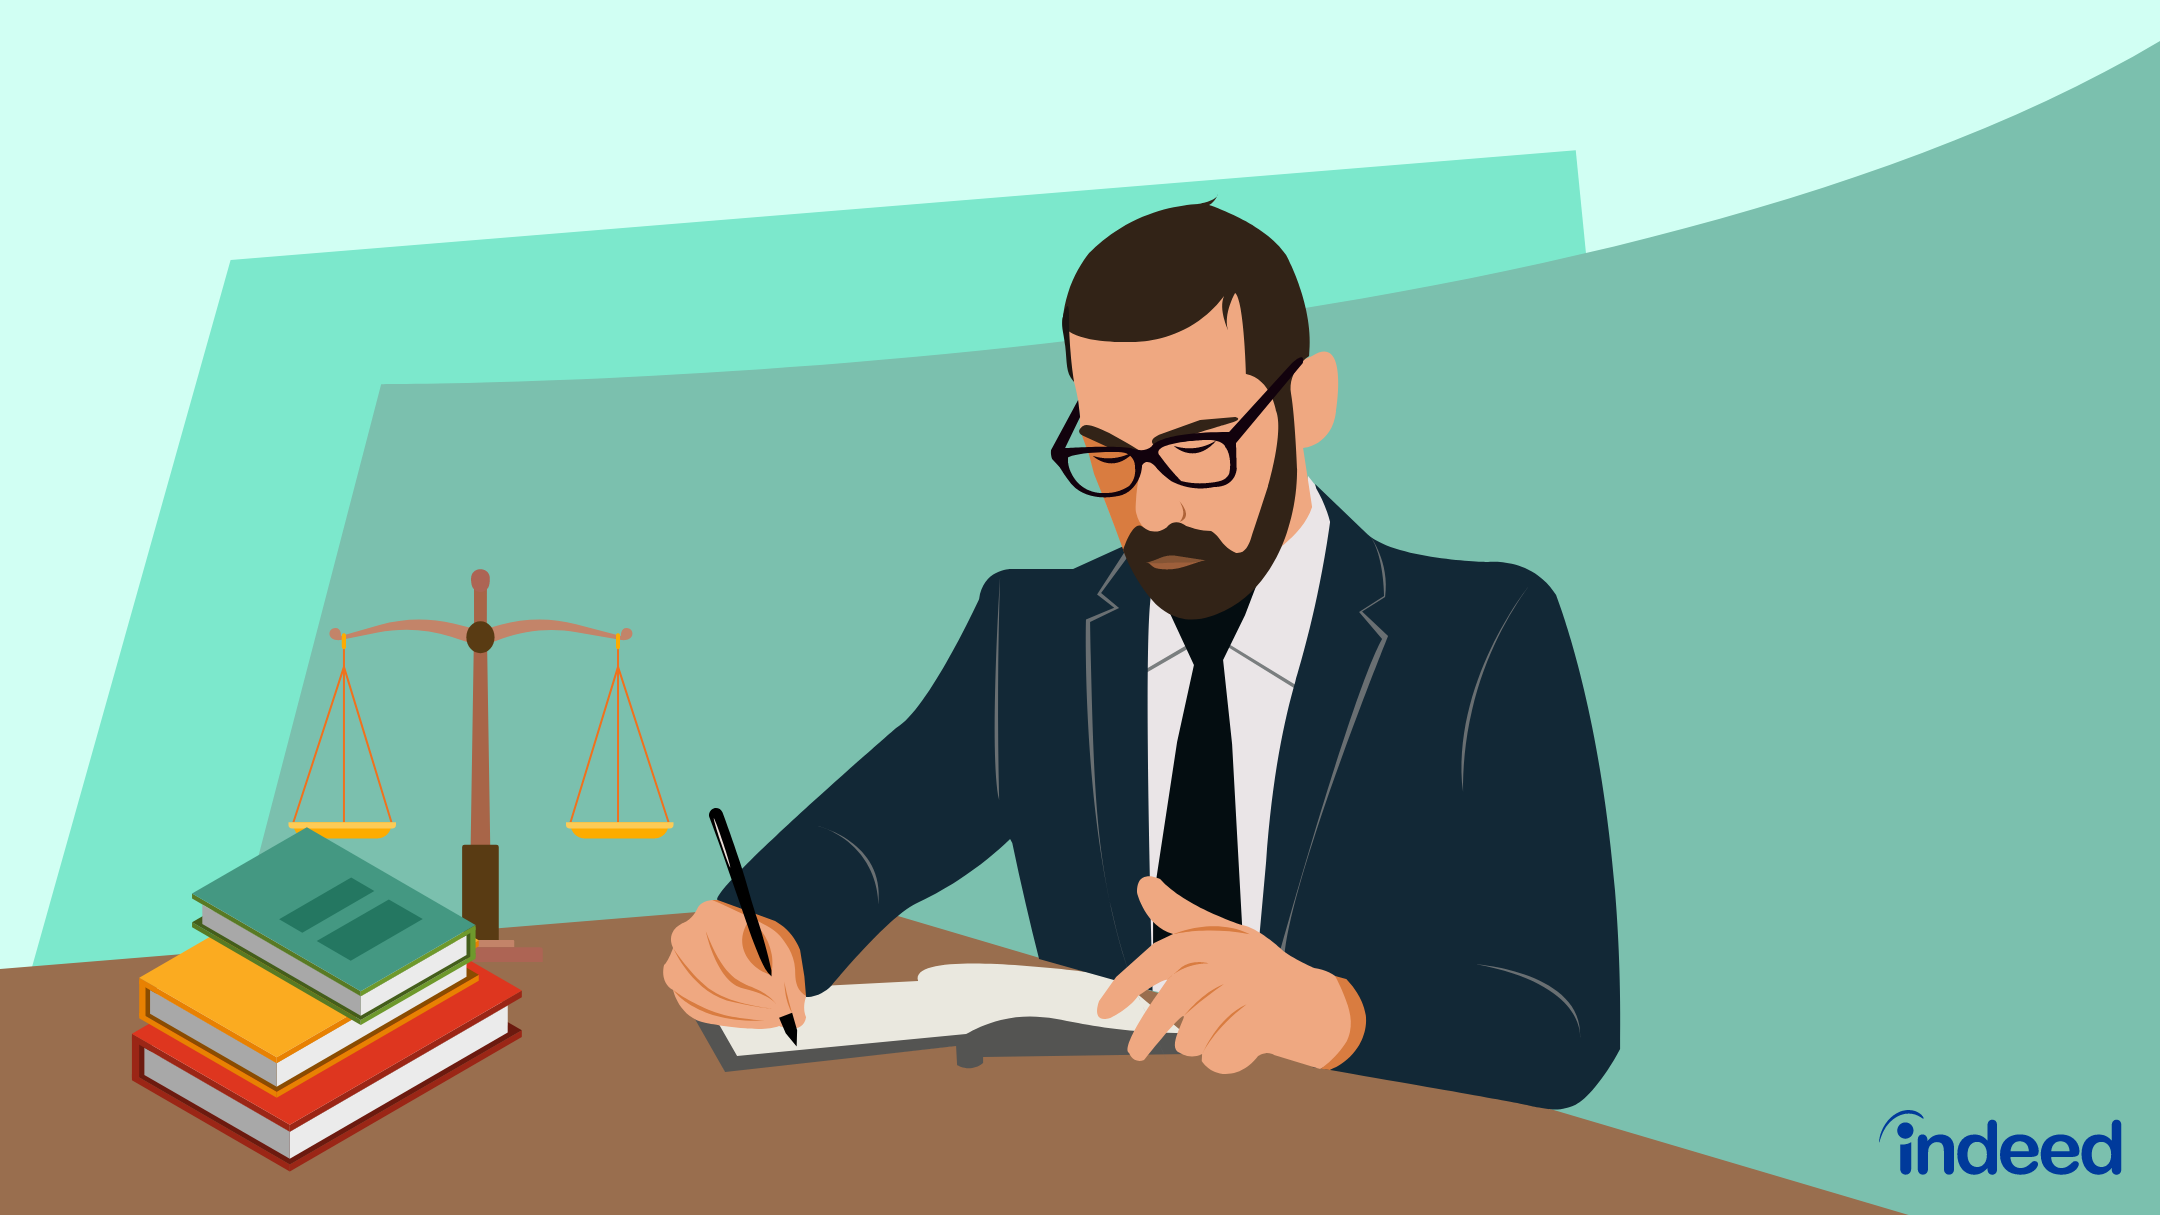 Law Student Jobs - Top 10 Tips on Finding Work